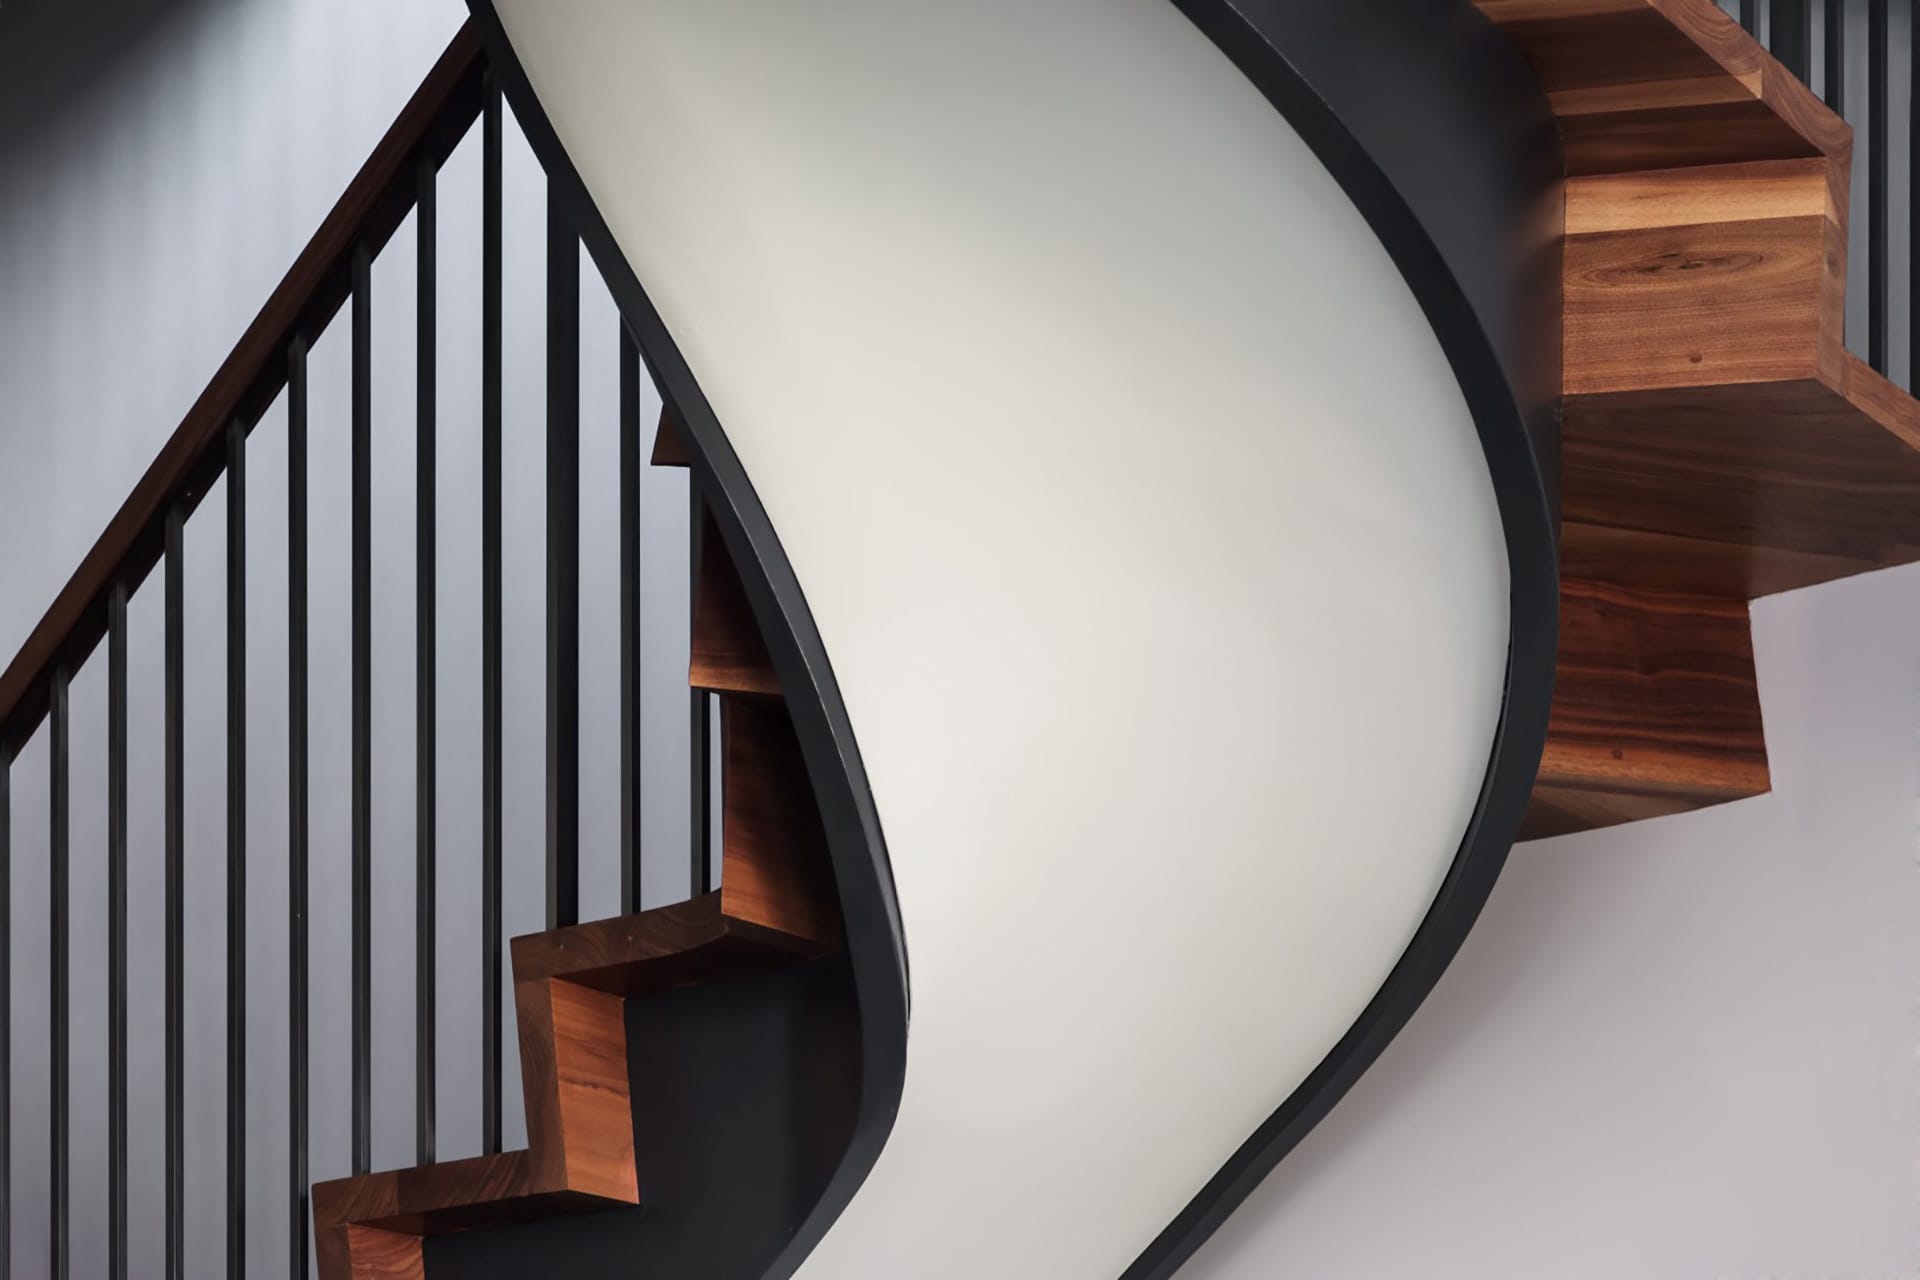 Sculptural staircase with black handrail and balusters, wood risers, and a white underside.